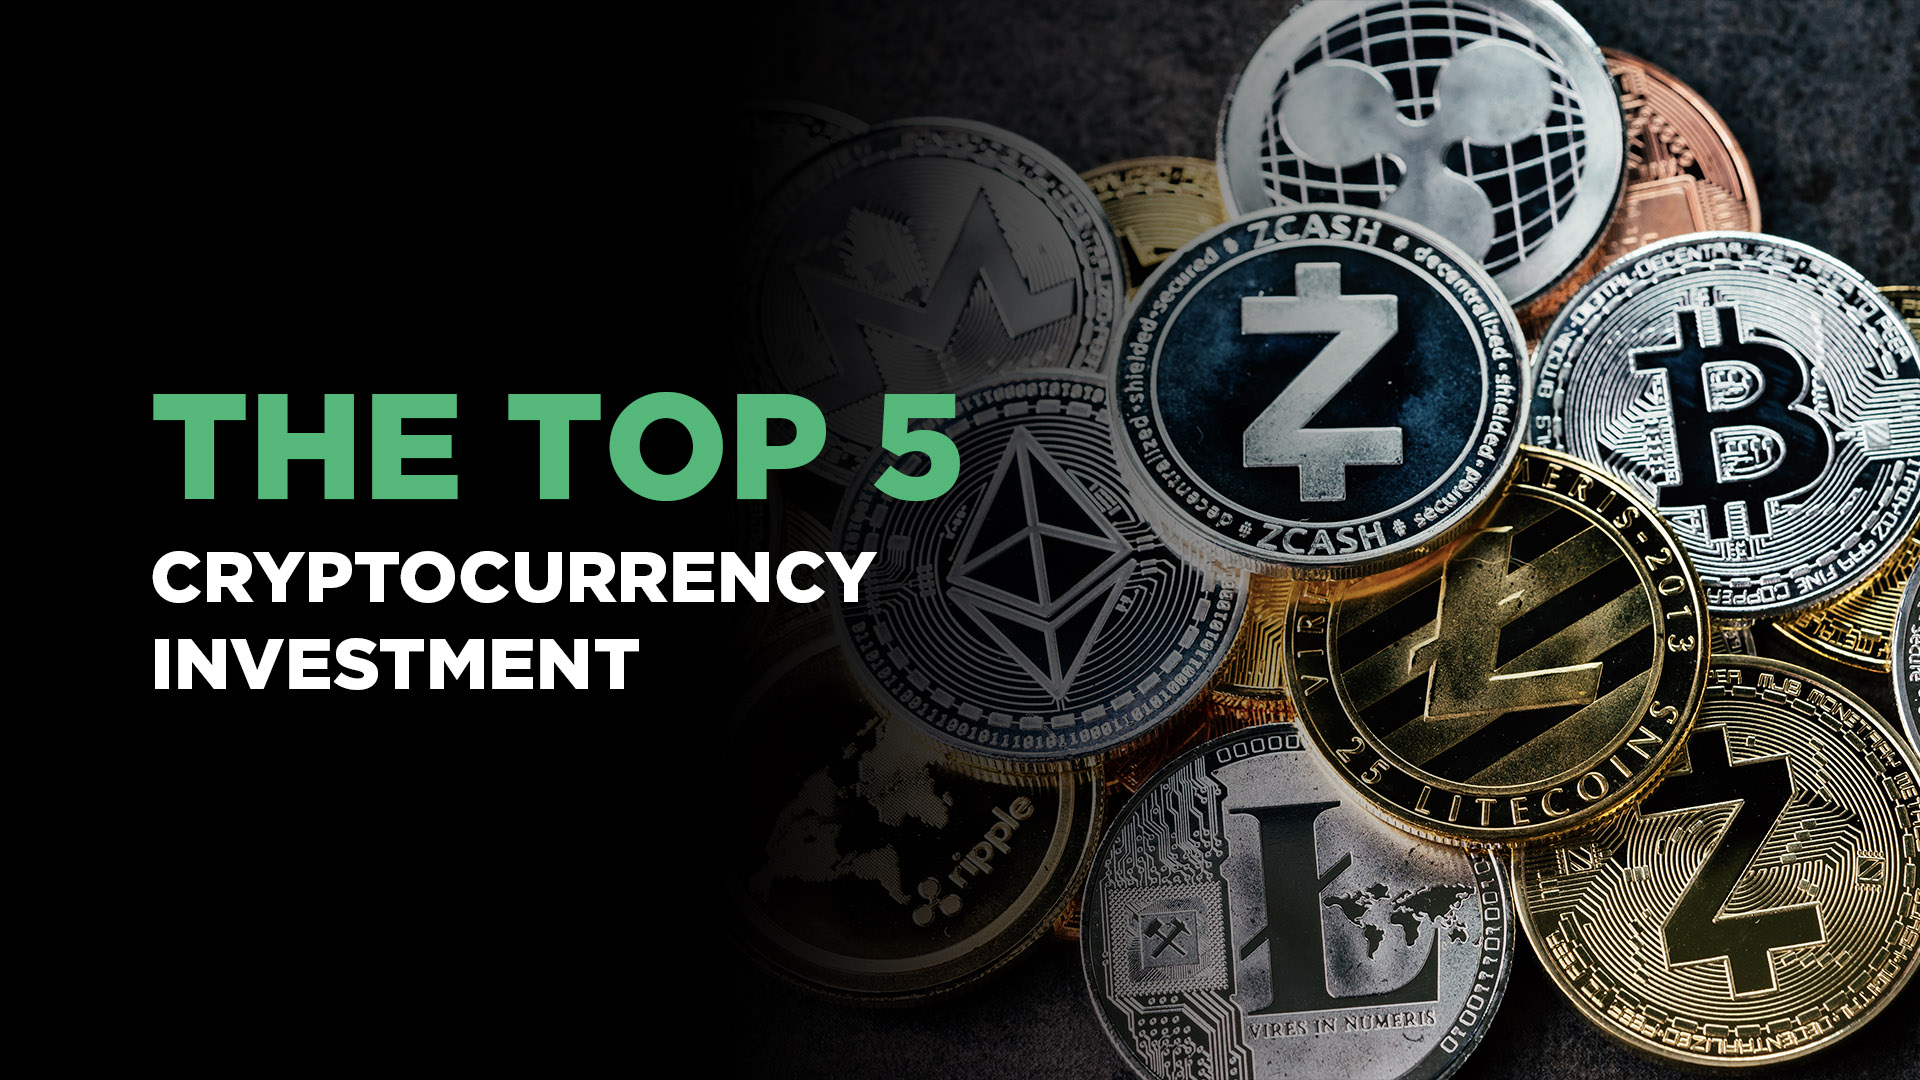 The Top 5 Cryptocurrency Investment Resources - Trade Stocks